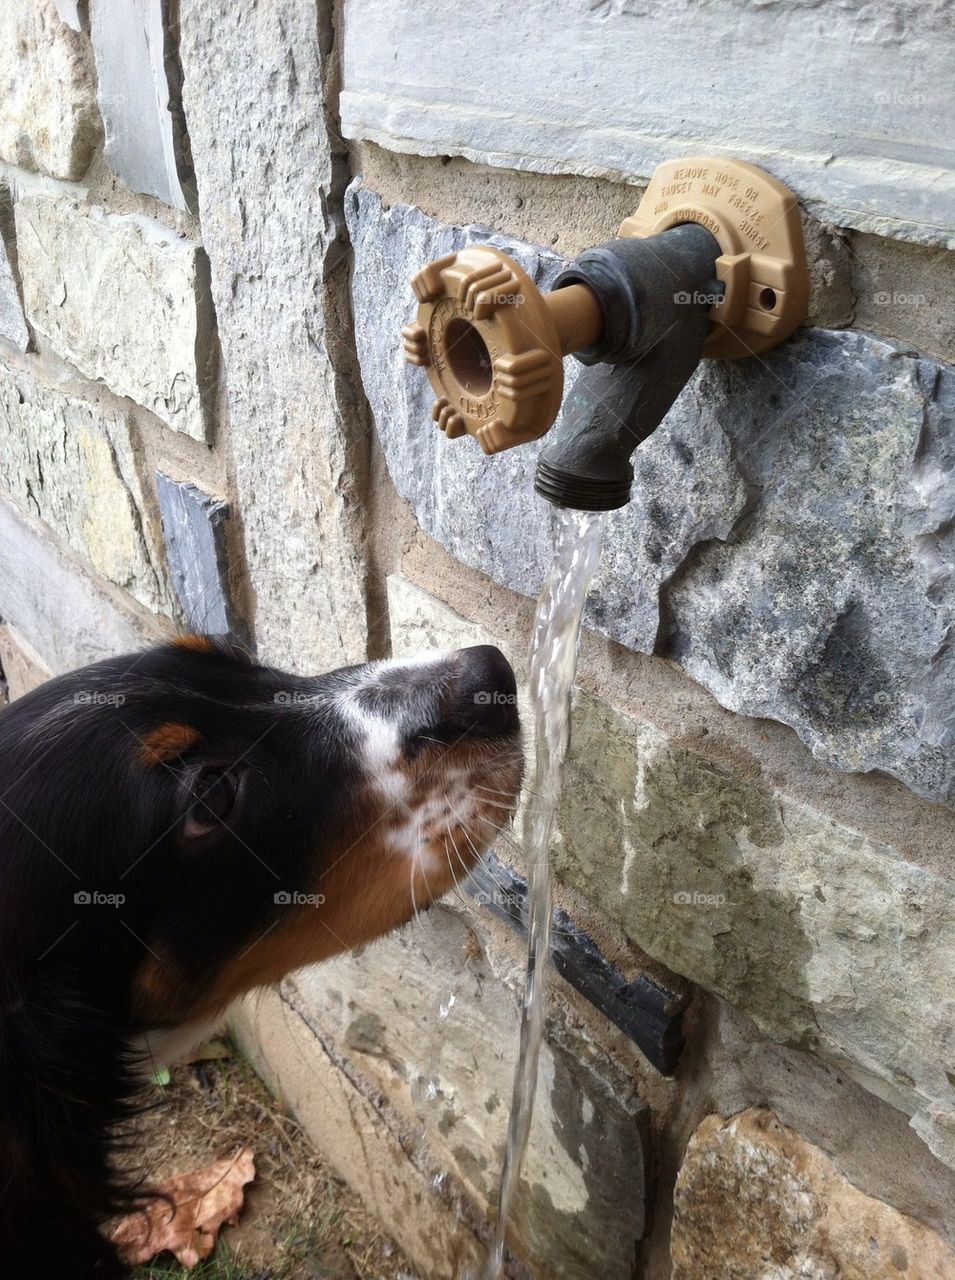 Thirsty pup needs a drink